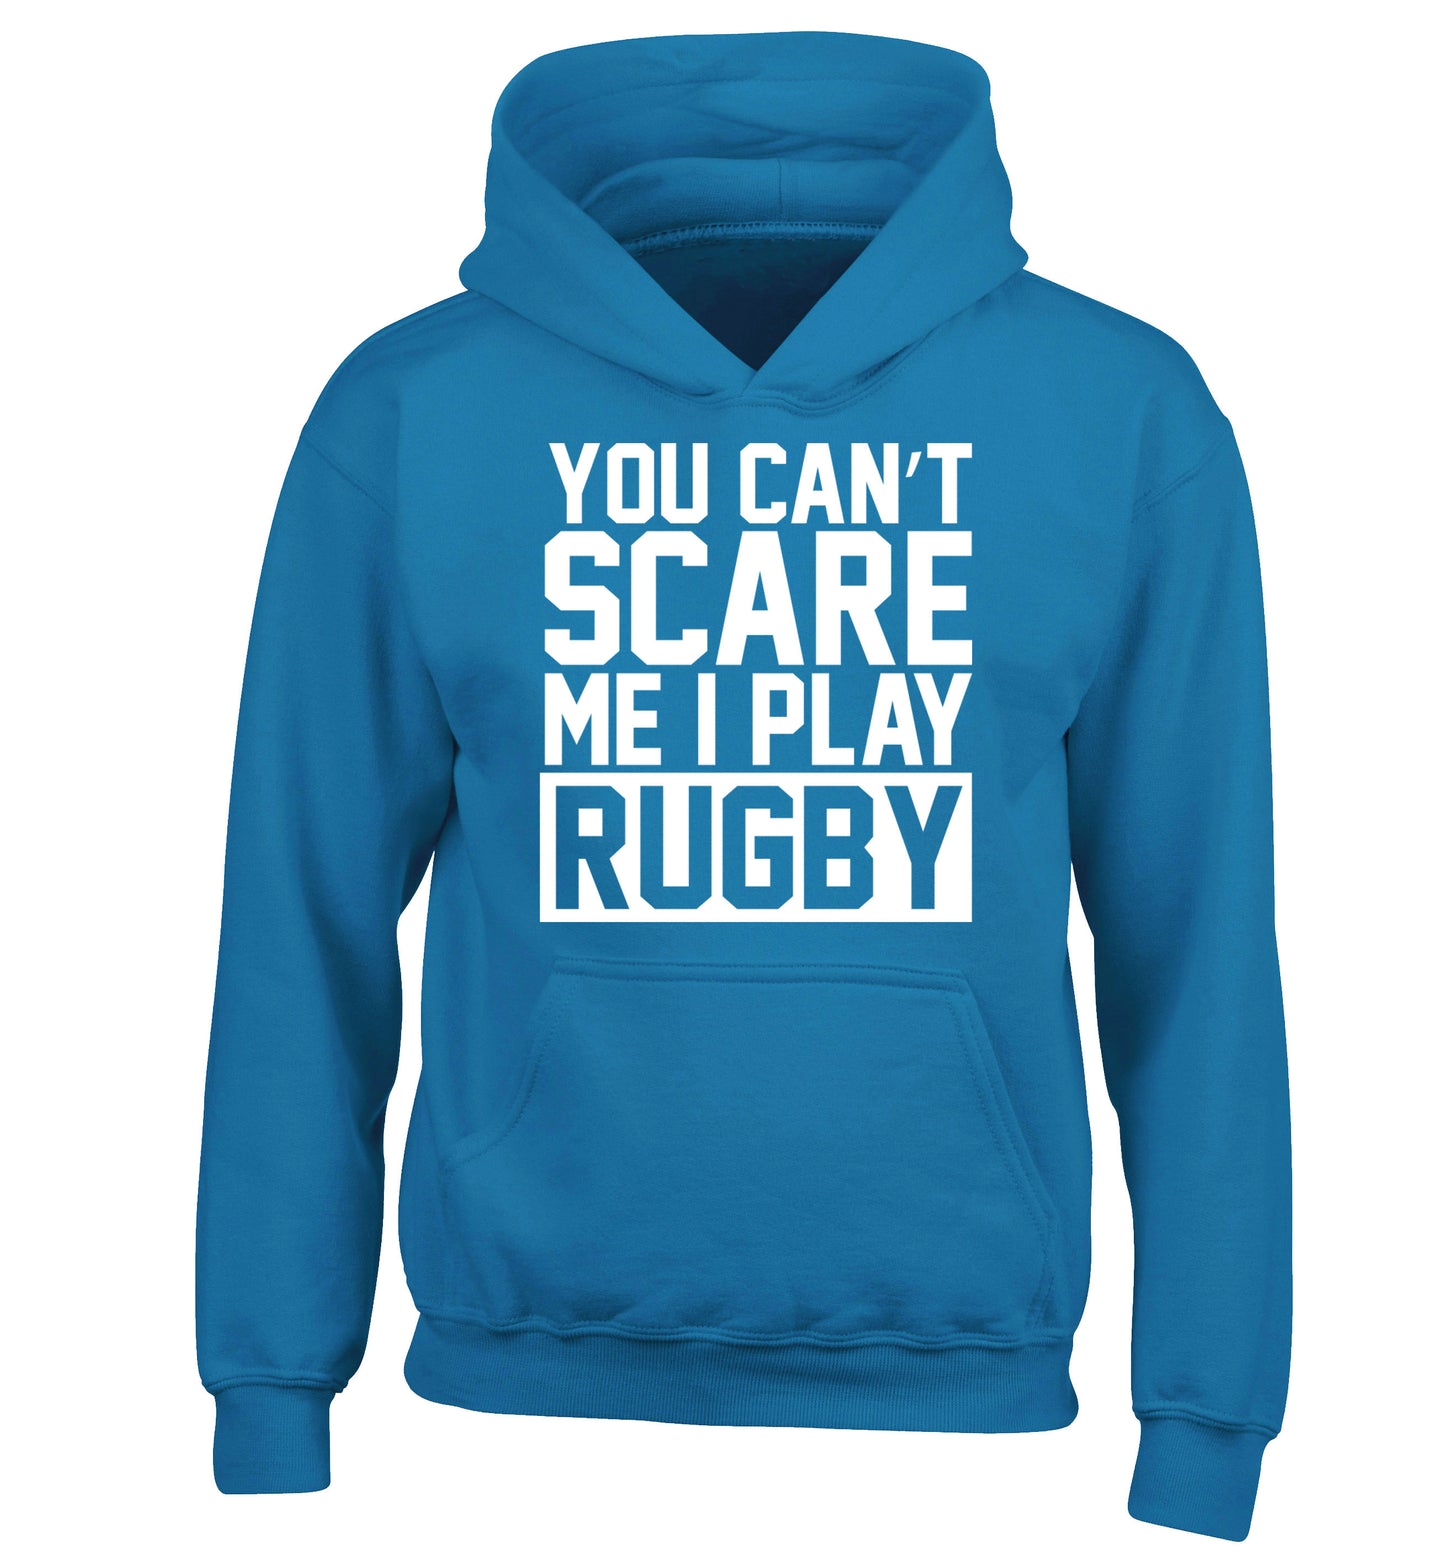 You can't scare me I play rugby children's blue hoodie 12-14 Years